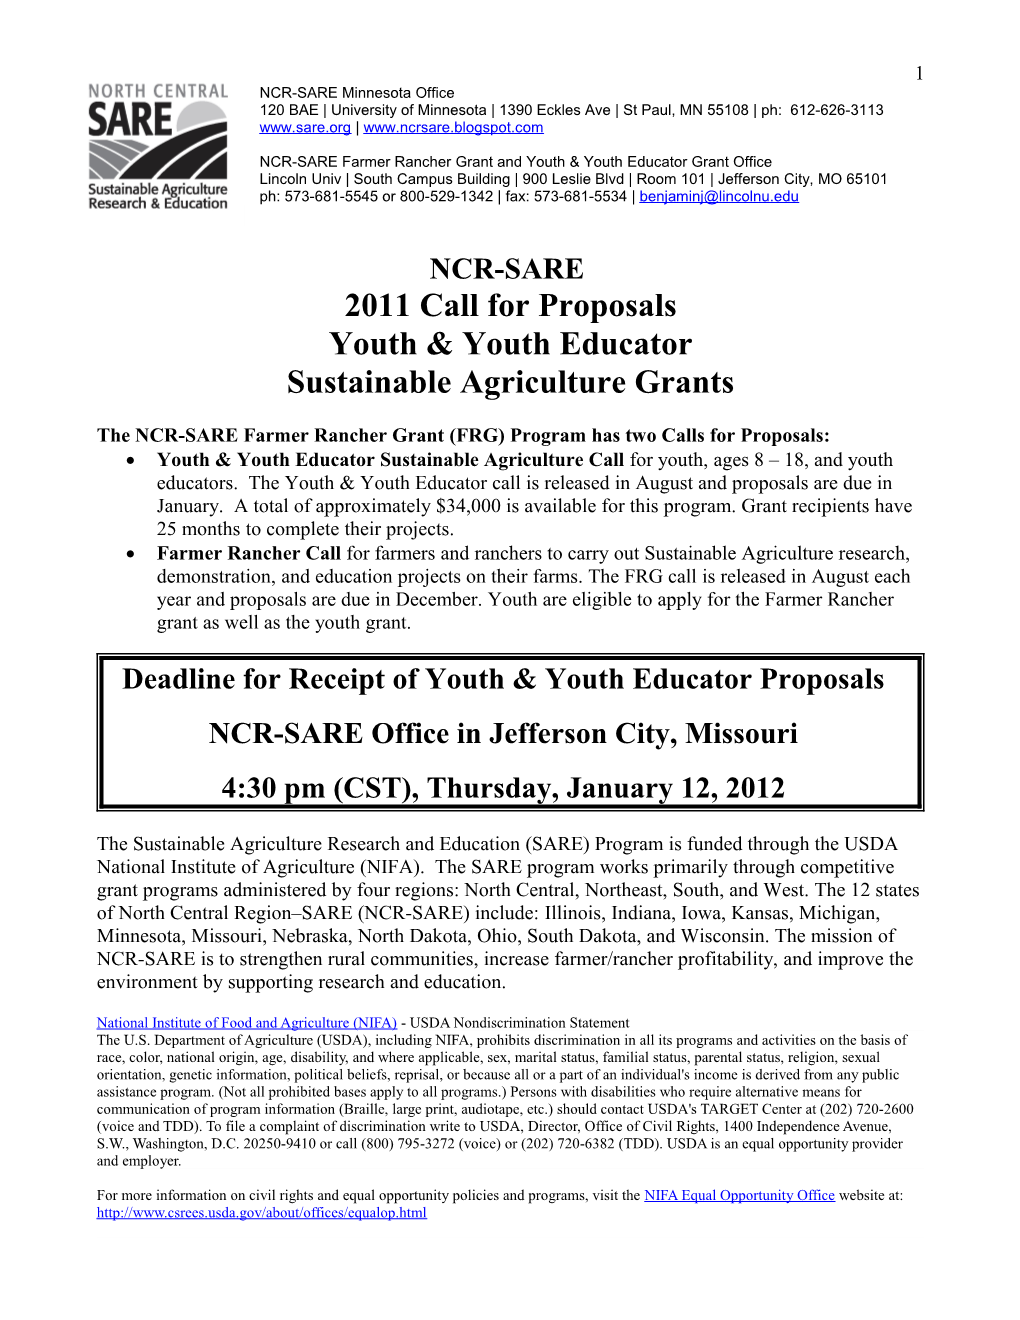 Dakotas SARE Youth Sustainable Agriculture Grants for 2007